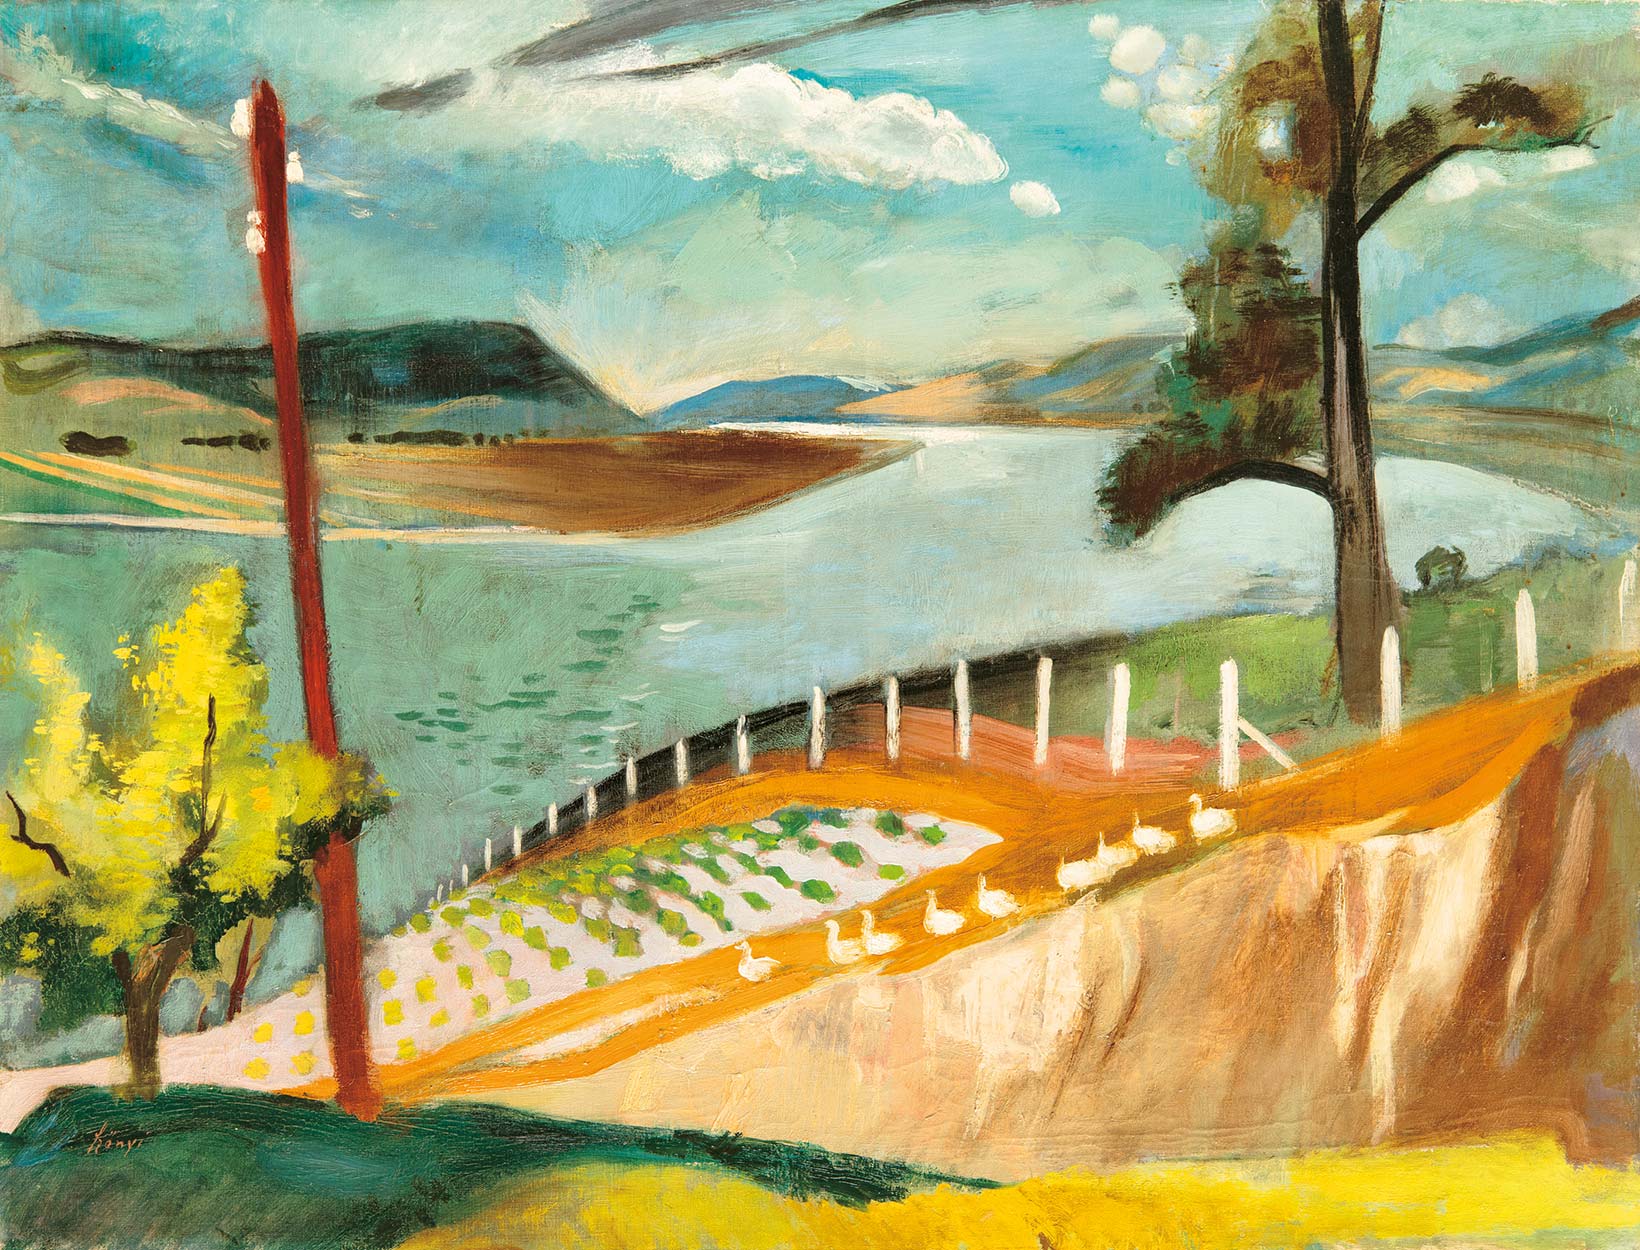 Szőnyi István (1894-1960) View of the Danube (Landscape with Geese), 1932